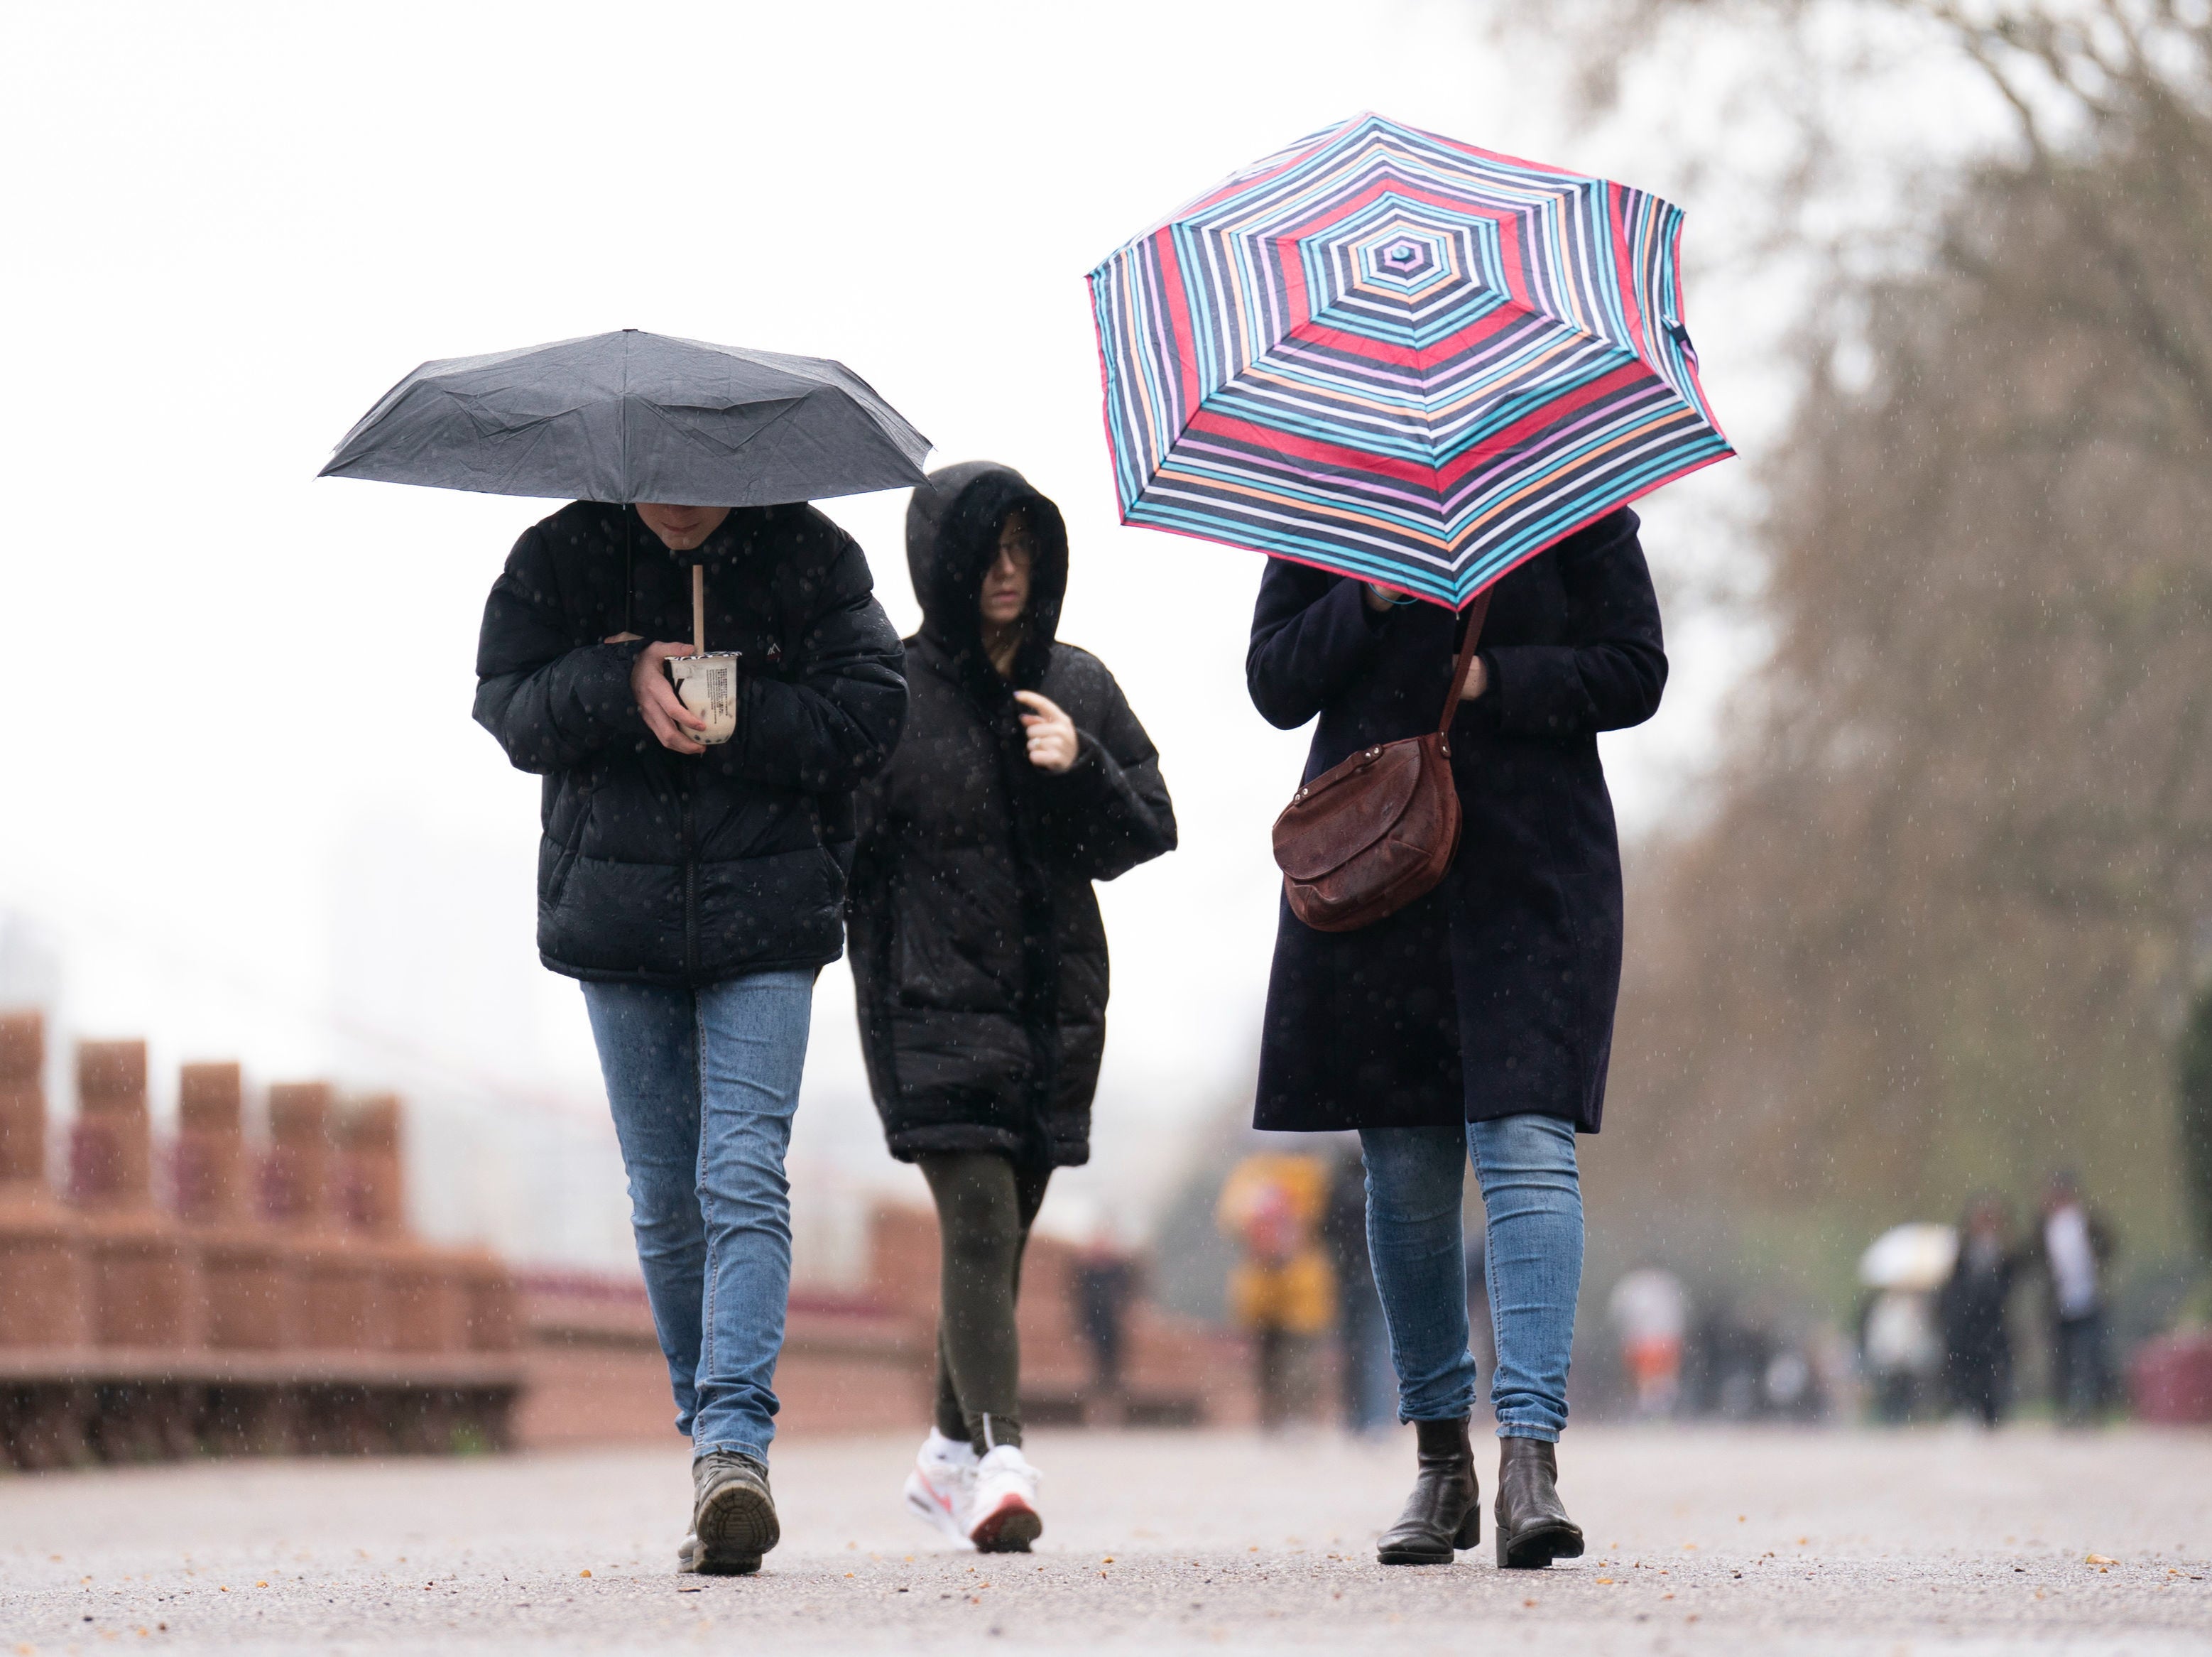 People brave the rainy conditions in Battersea Park, London, on Easter on Monday